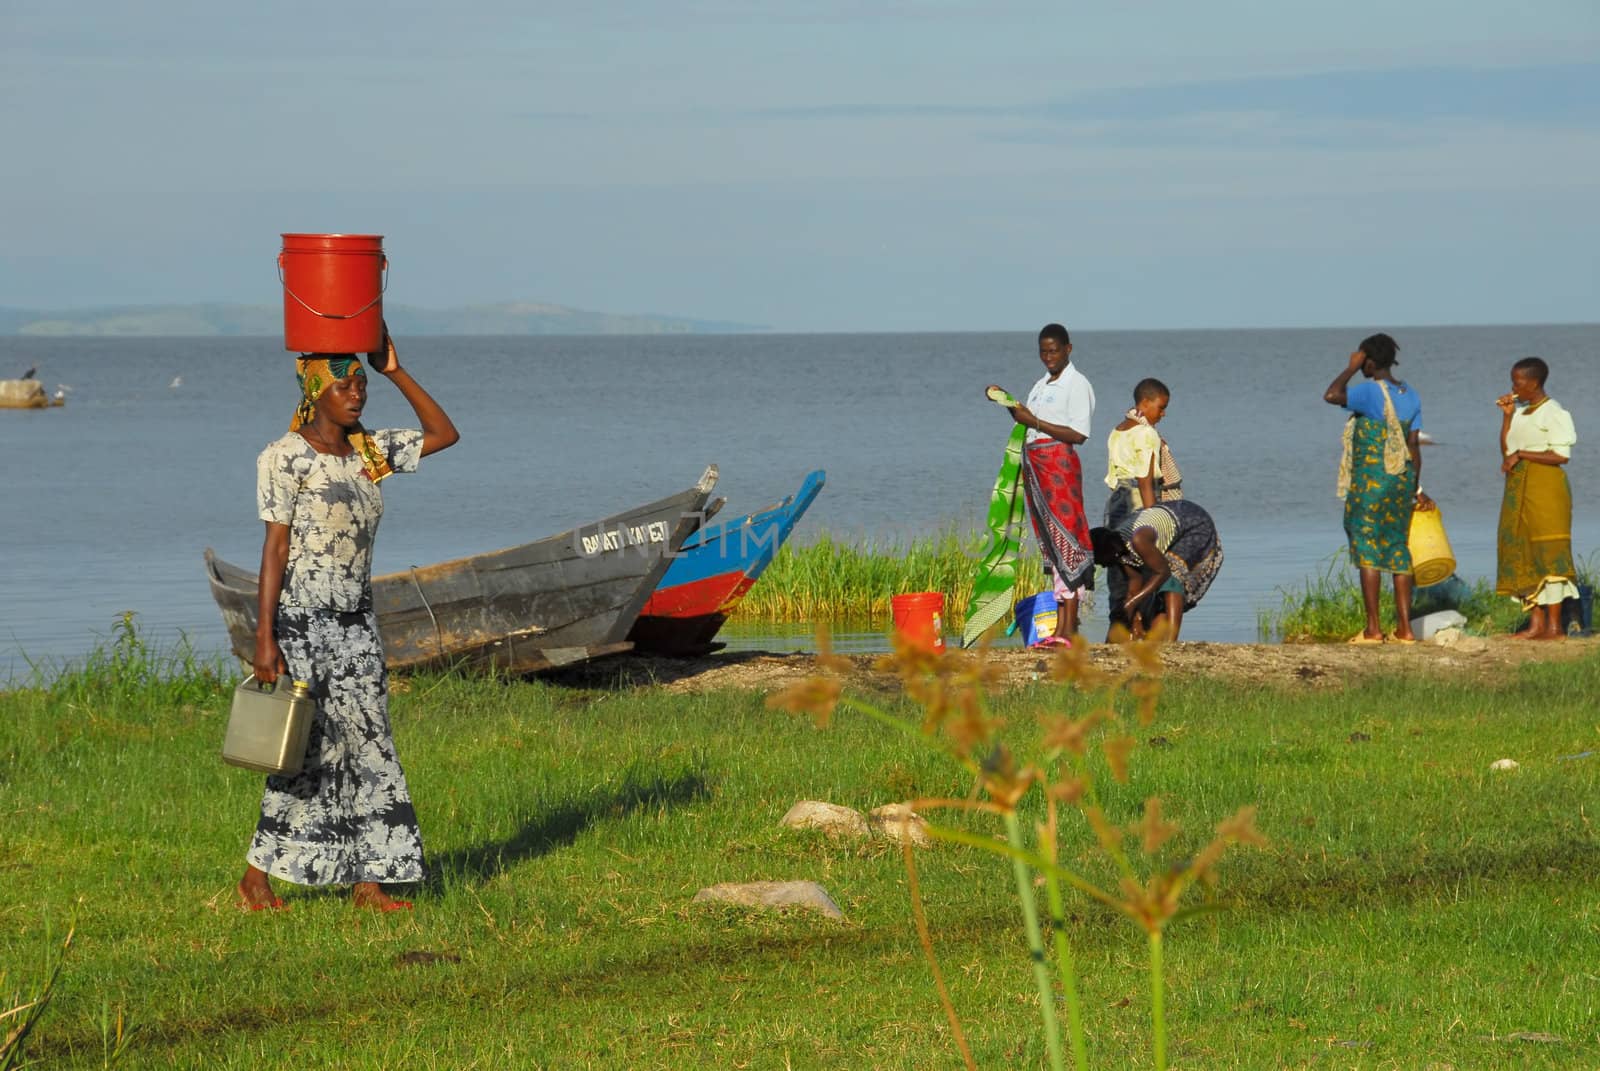 Mwanza,Tanzania-7 June, 2010:Women on the shore of Lake Victoria. Women wash their clothes in the lake and load the containers on their heads